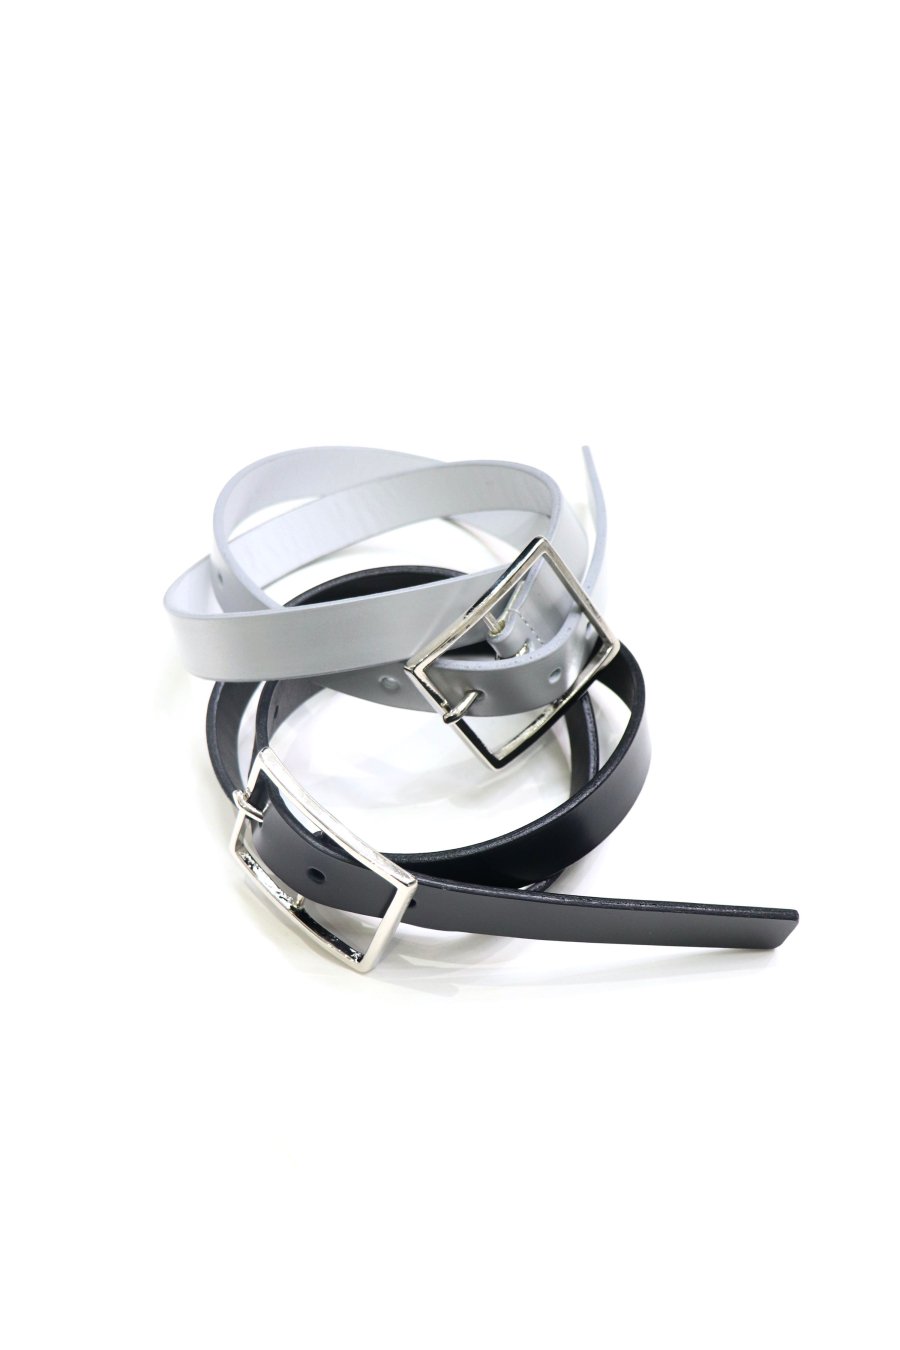 LITTLEBIG  Narrow Leather Belt(Silver or Black)<img class='new_mark_img2' src='https://img.shop-pro.jp/img/new/icons15.gif' style='border:none;display:inline;margin:0px;padding:0px;width:auto;' />